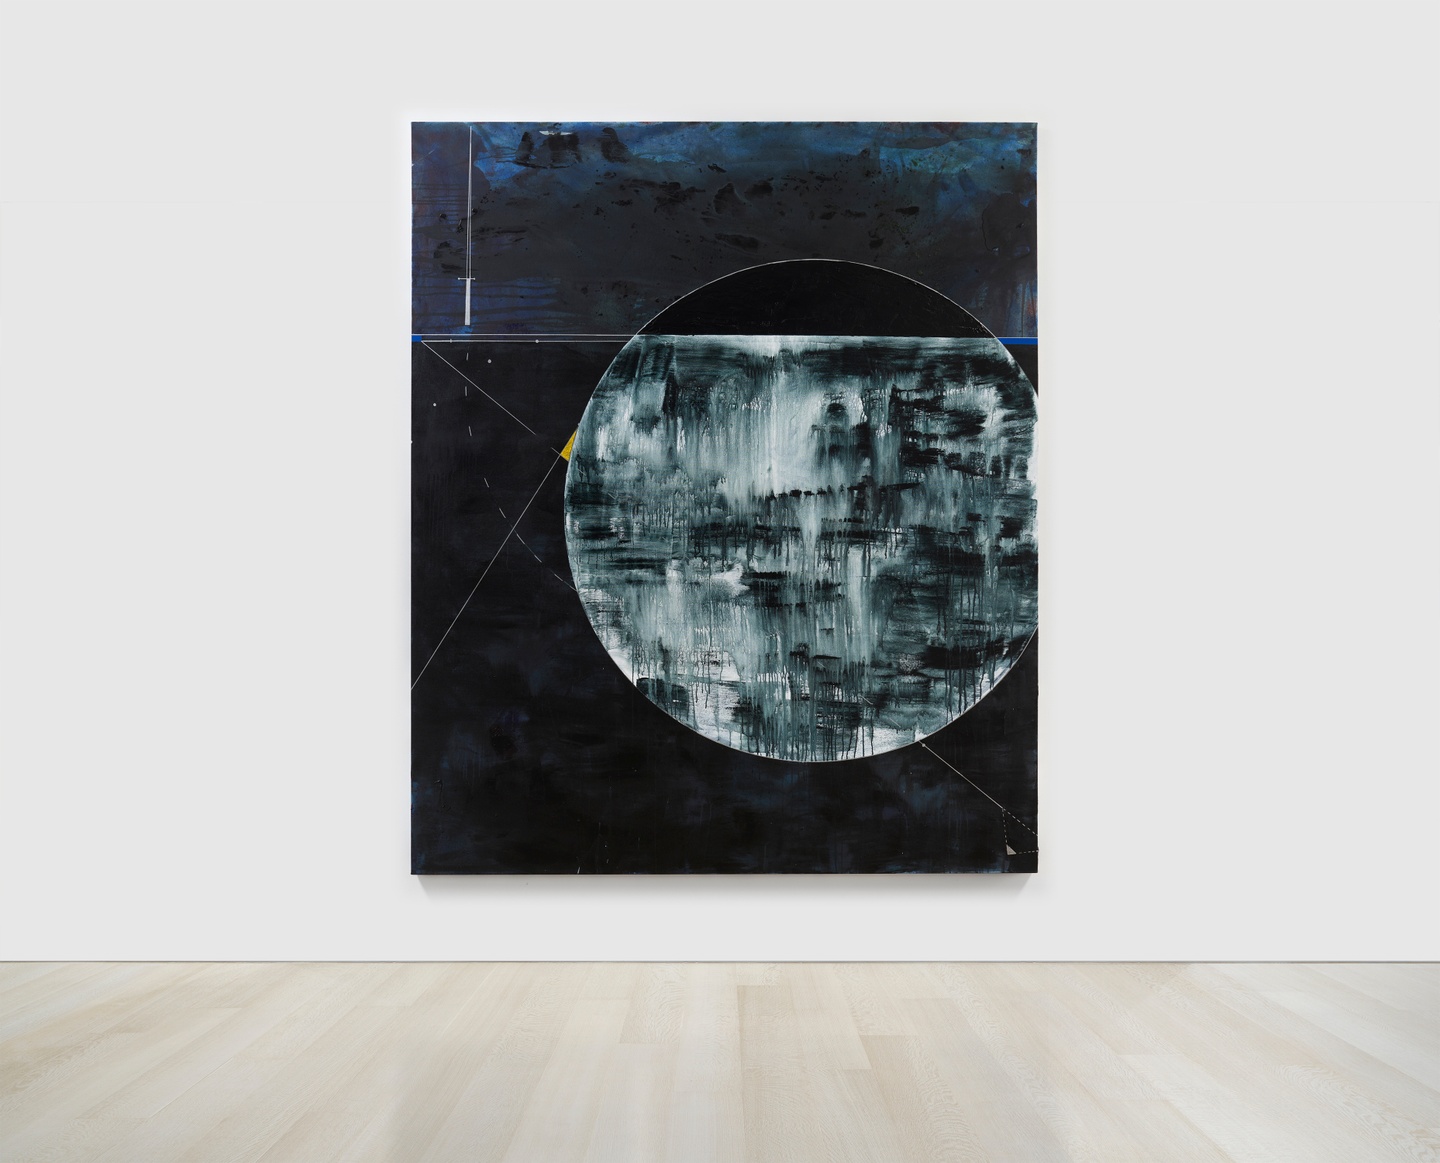 Abstract painting in dark blues and grays with a circle and other geometric shapes